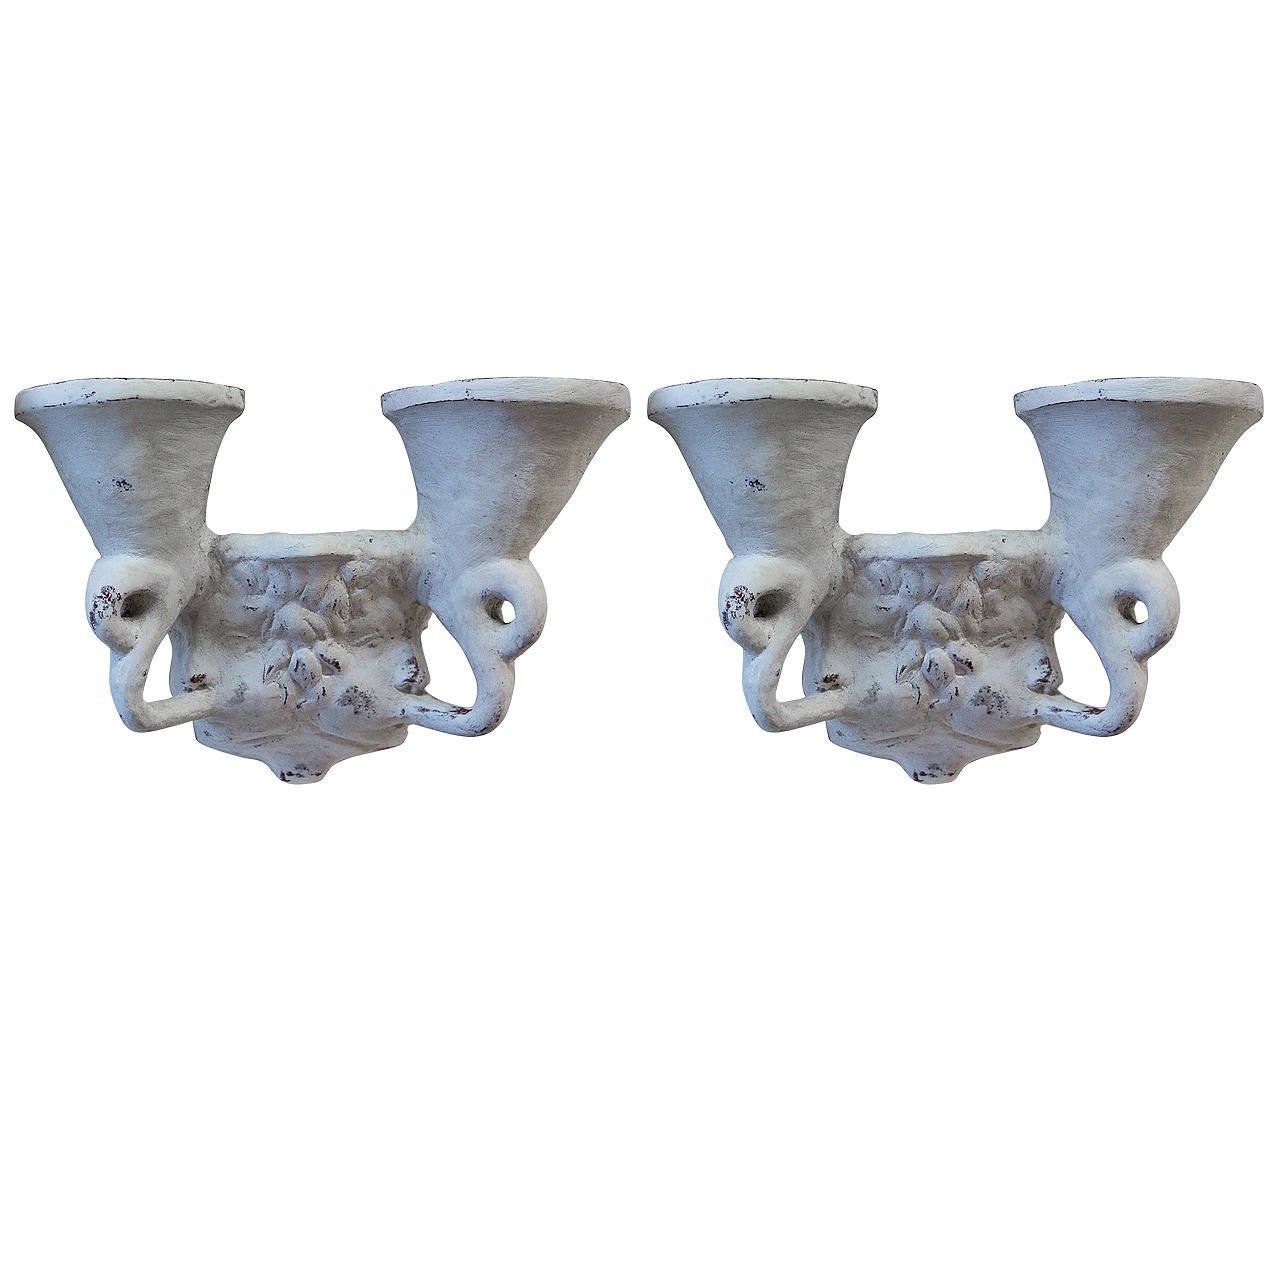 A pair of plaster patinated terracotta sconces designed by Androusov for André Arbus. Fully documented in the ARBUS monograph. Signed and dated 1947.